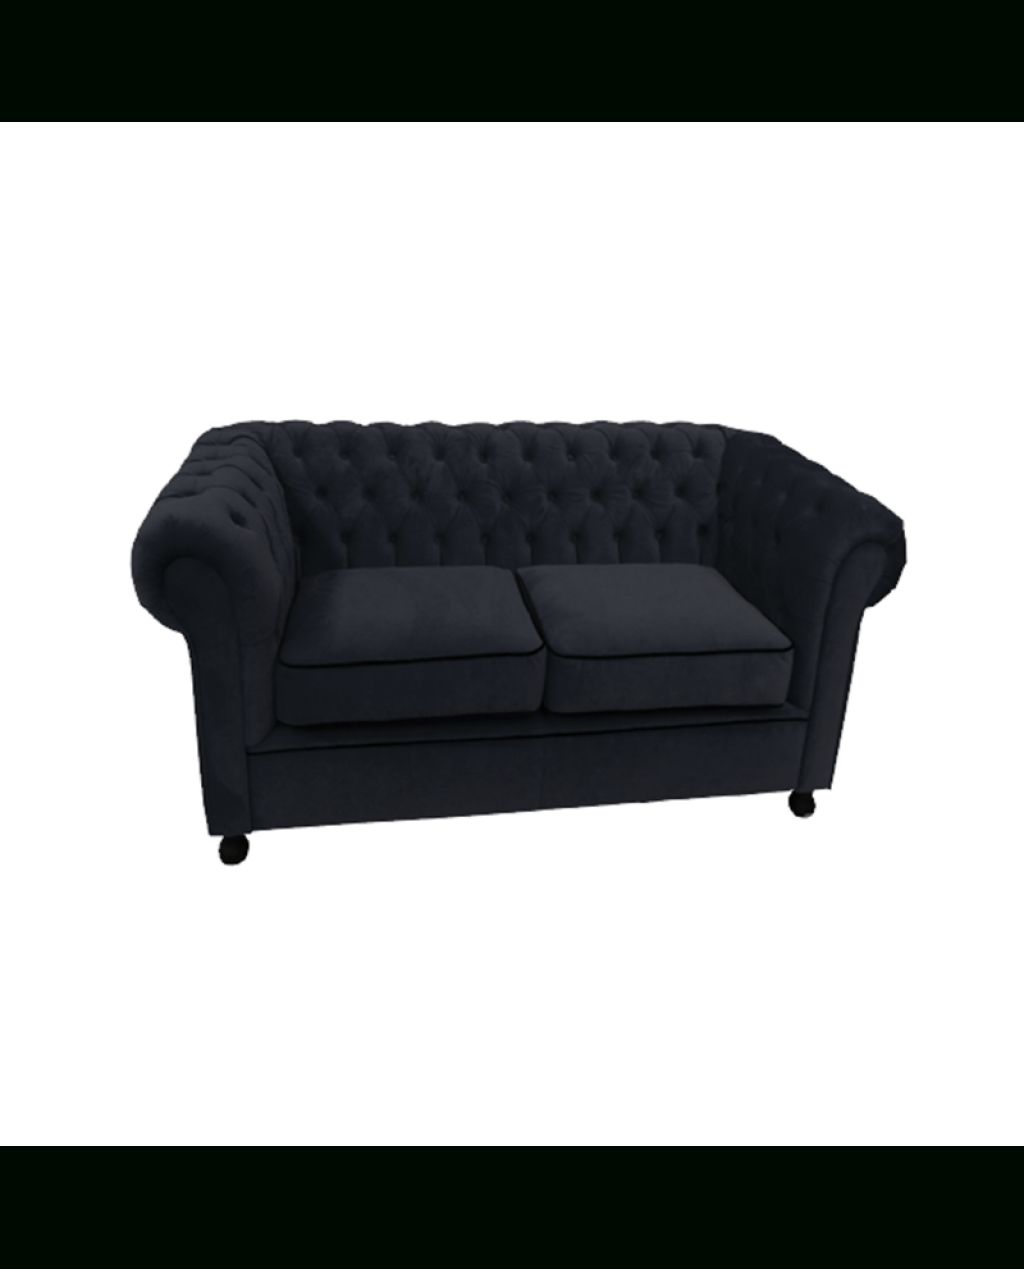 Most Popular Black Velvet Chesterfield Style 2 Seater Sofa Hire Inside Black 2 Seater Sofas (View 2 of 15)